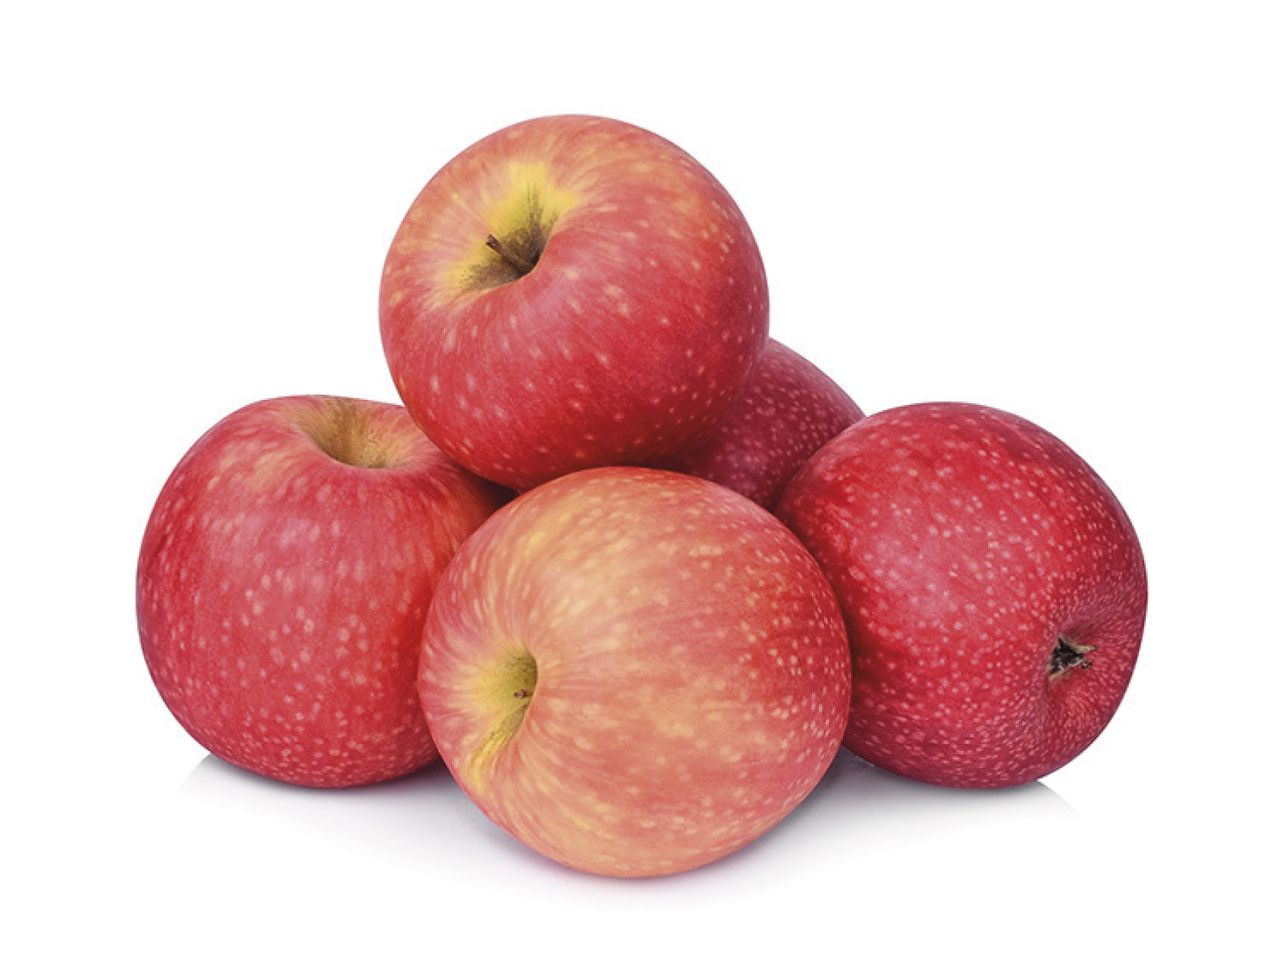 Go to full screen view: Oaklands Pink Lady Apples - Image 1